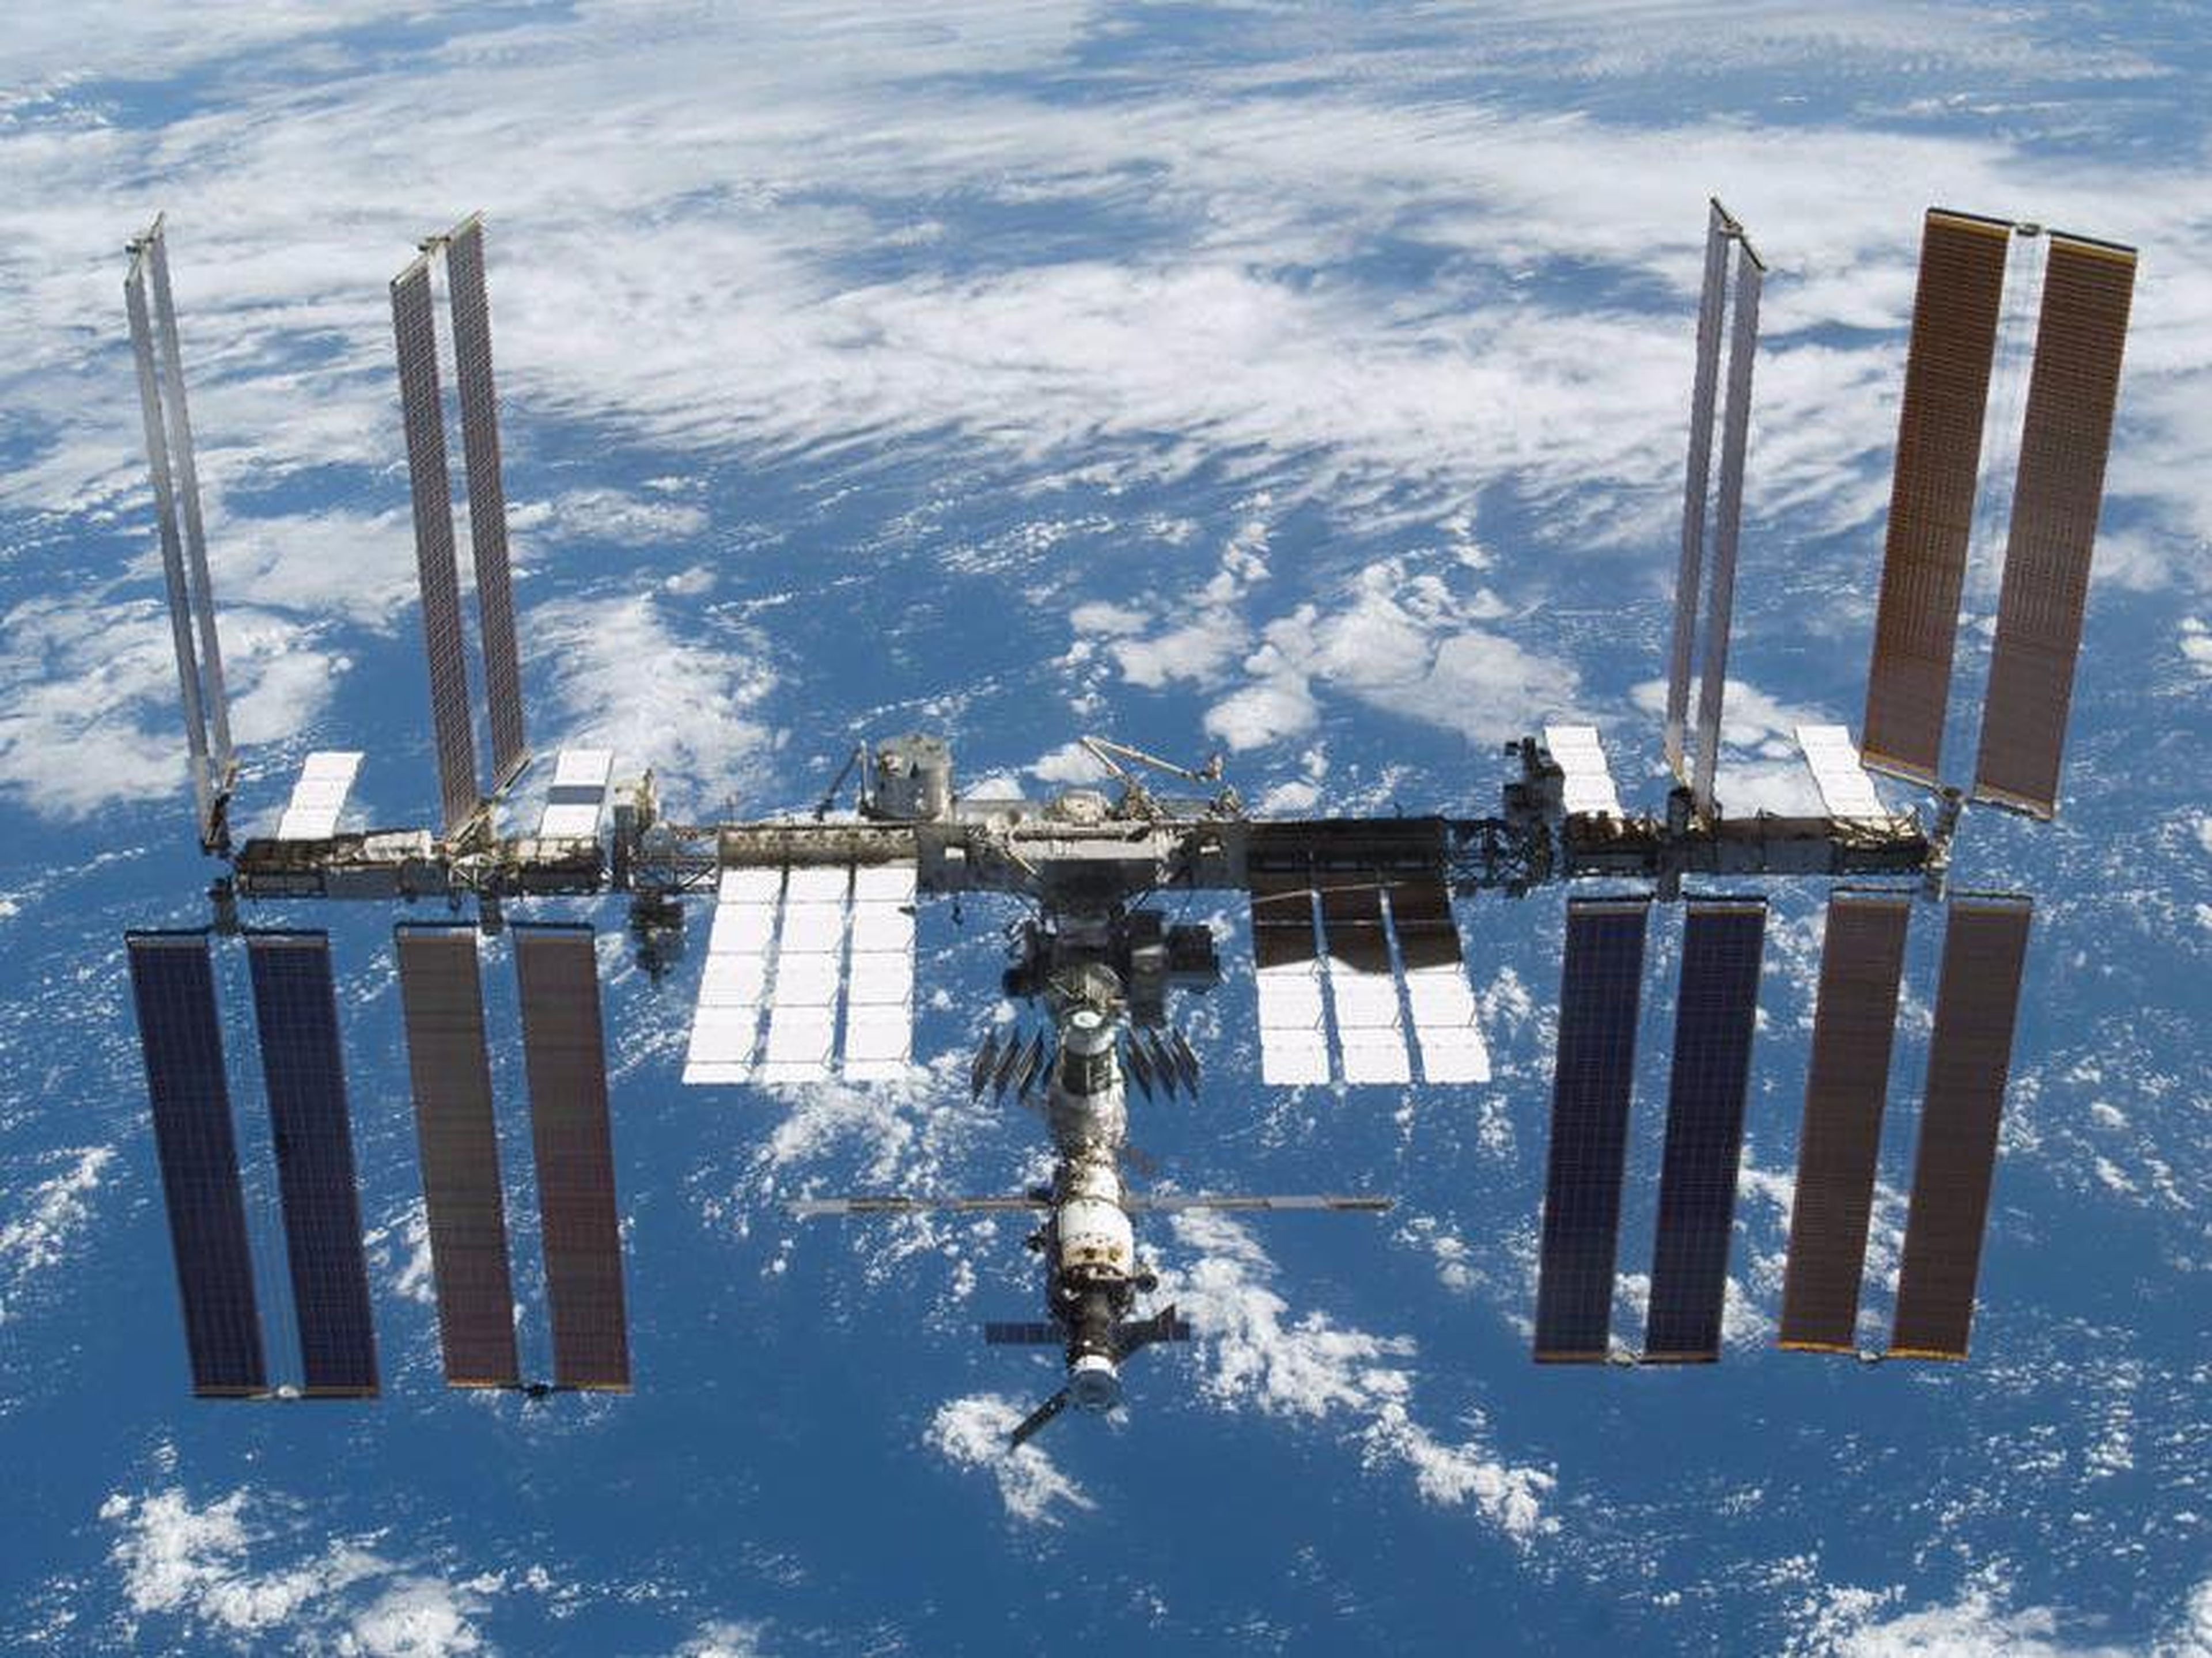 The ISS toilet doesn't have a perfect track record: Part of it went out of order in May 2008. Luckily, the solid-waste function still worked, and a Soyuz spacecraft that was attached to the station at the time also had a toilet